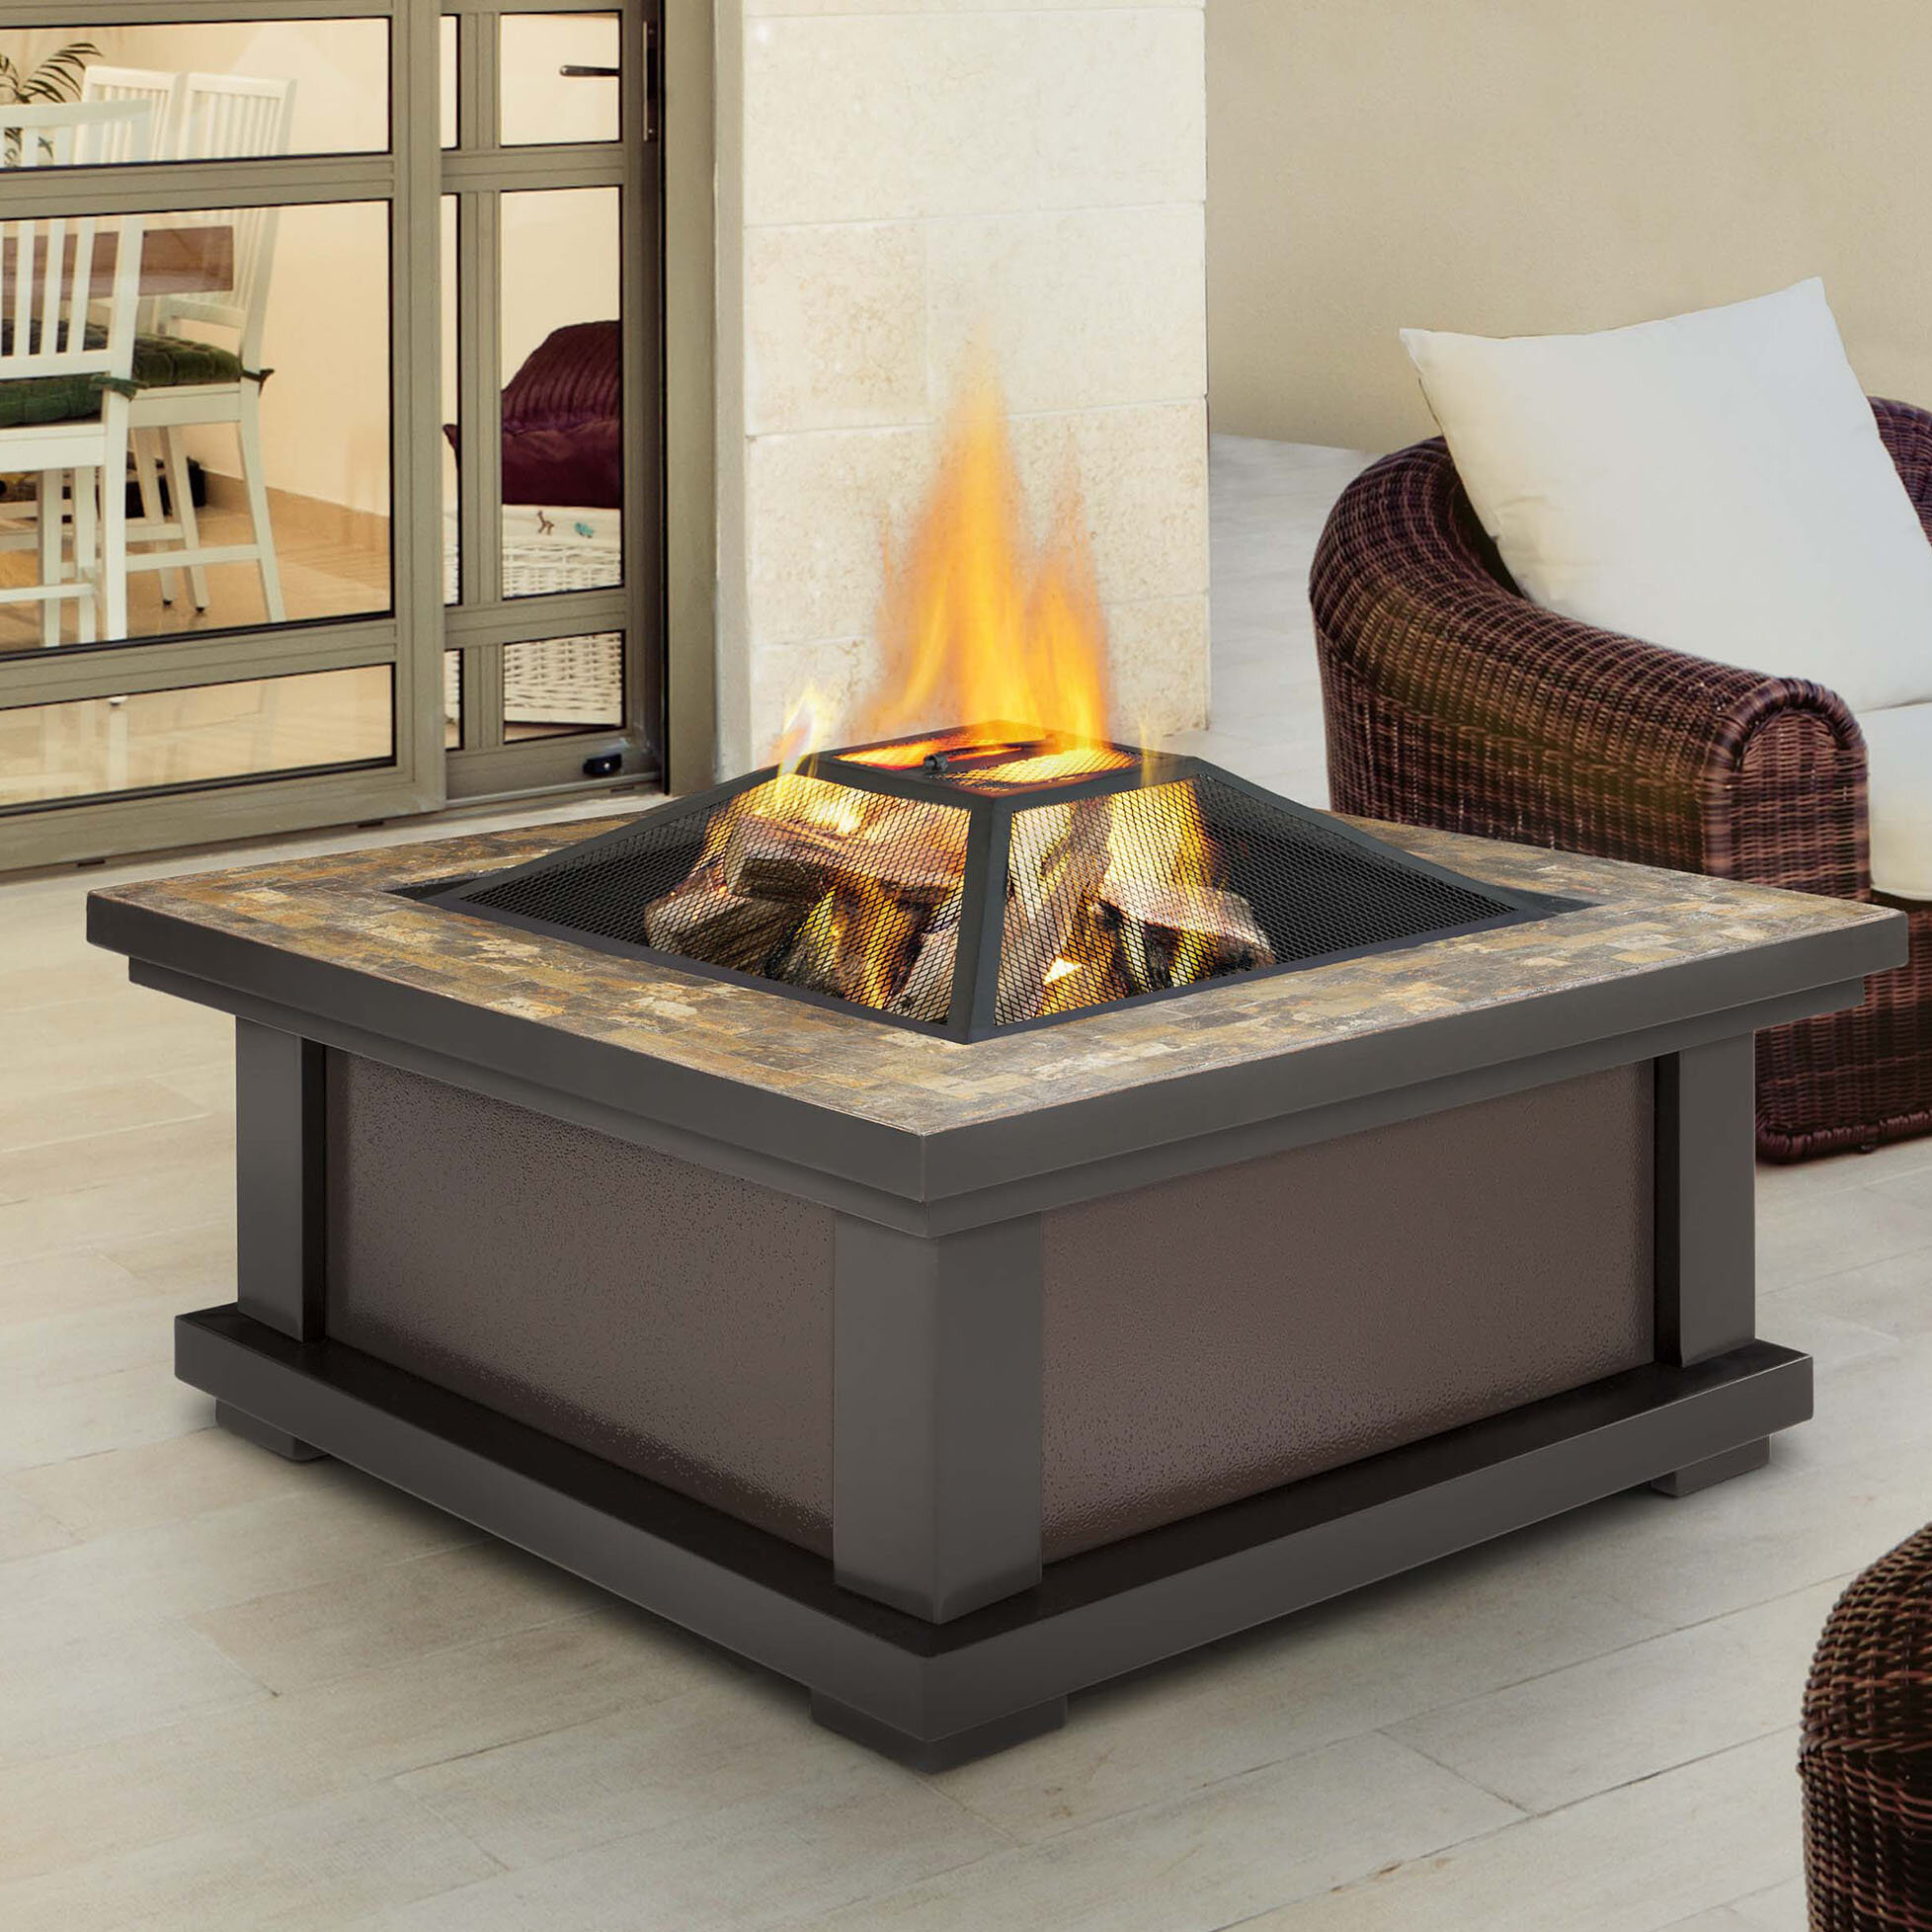 Real Flame Alderwood Steel Wood Burning Fire Pit Table Reviews